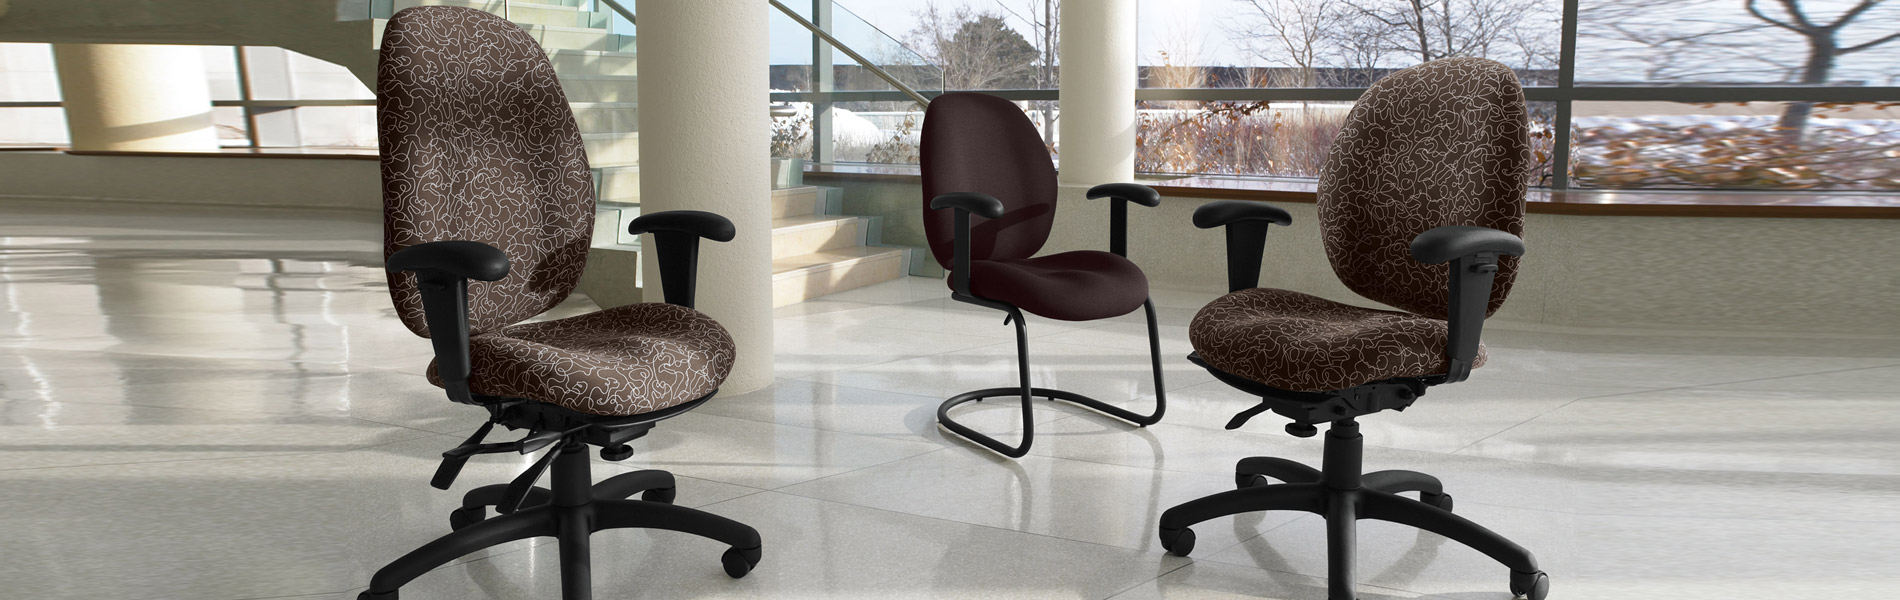 Big and Tall Office Chairs "Orthrus" Big and Tall Desk Chairs 